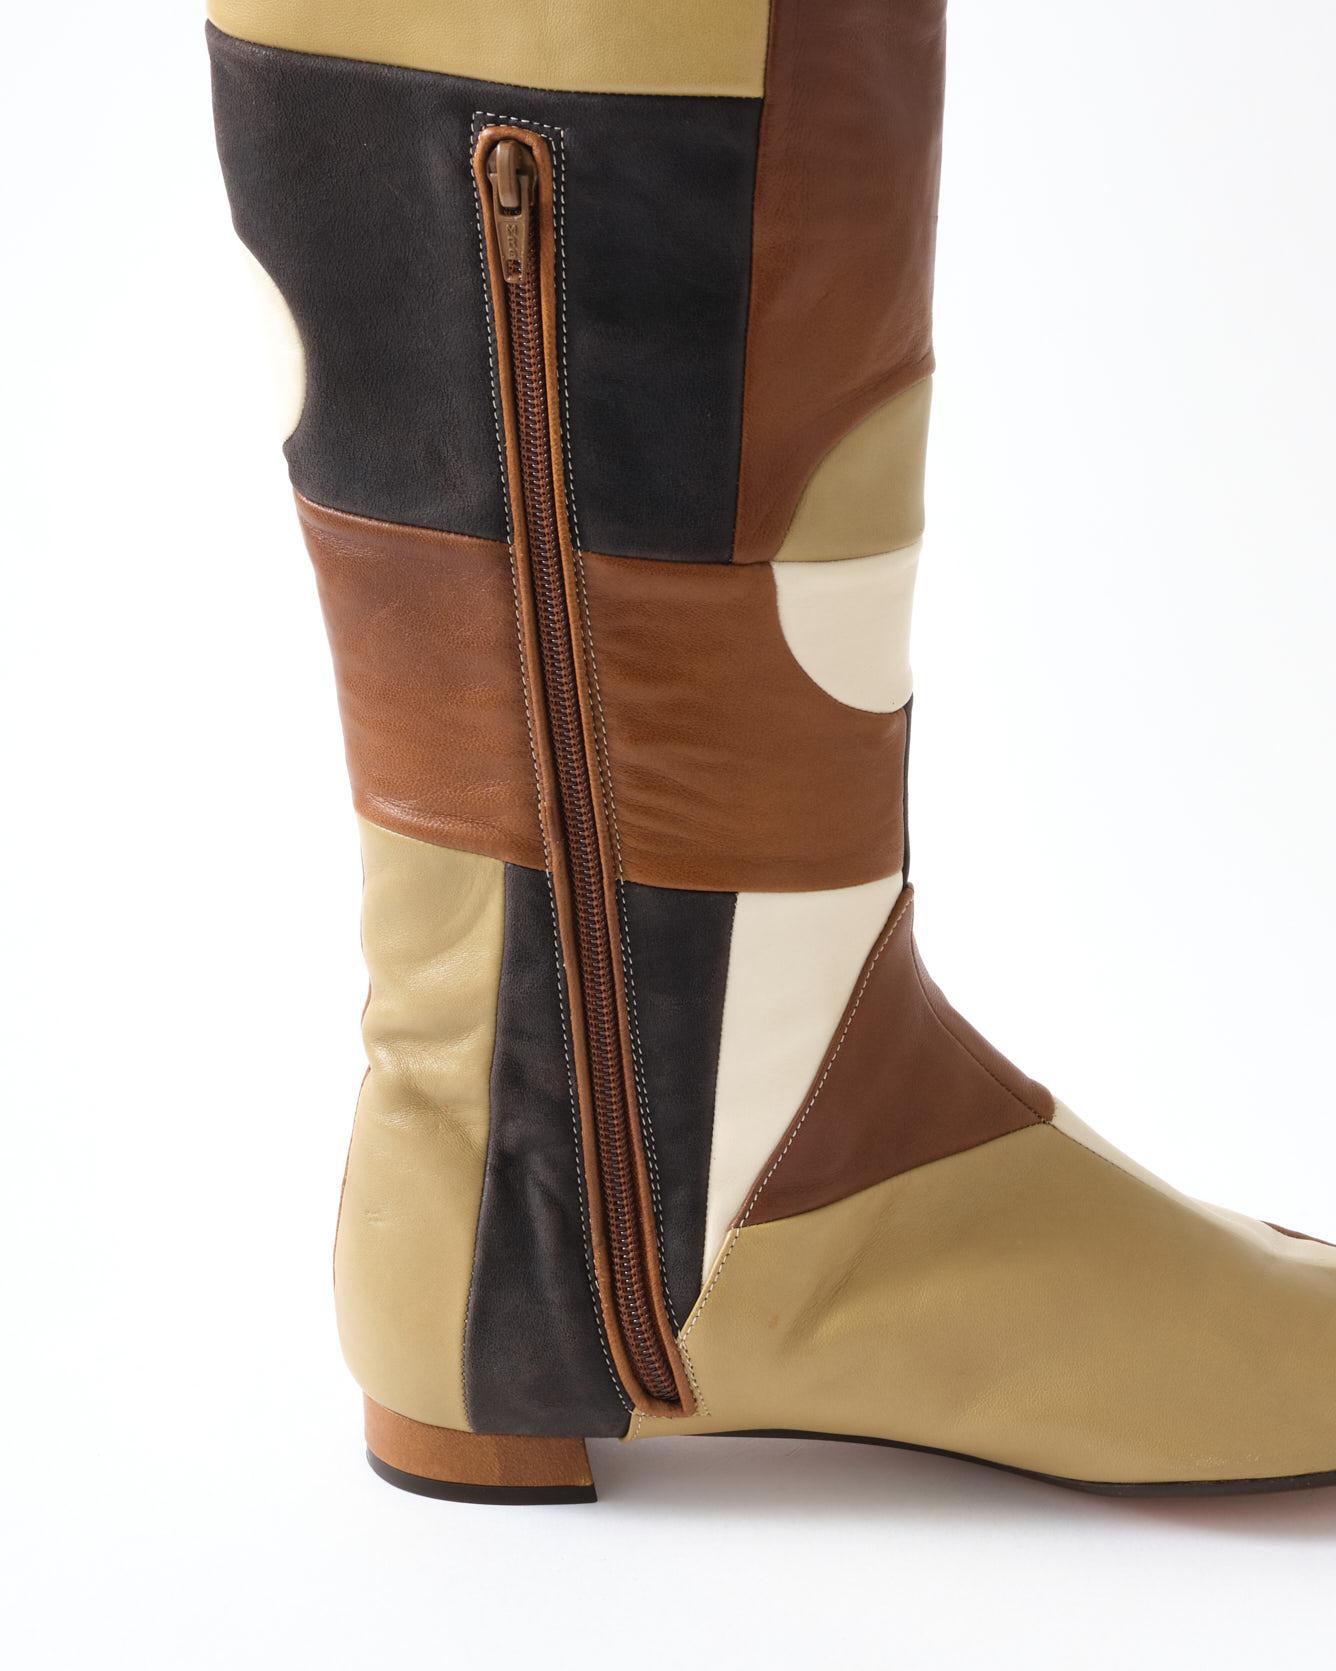 Hand-Crafted Marni Leather Boots, 1960's Style Design, Brown, Beige & Khaki, Pair of Boots For Sale